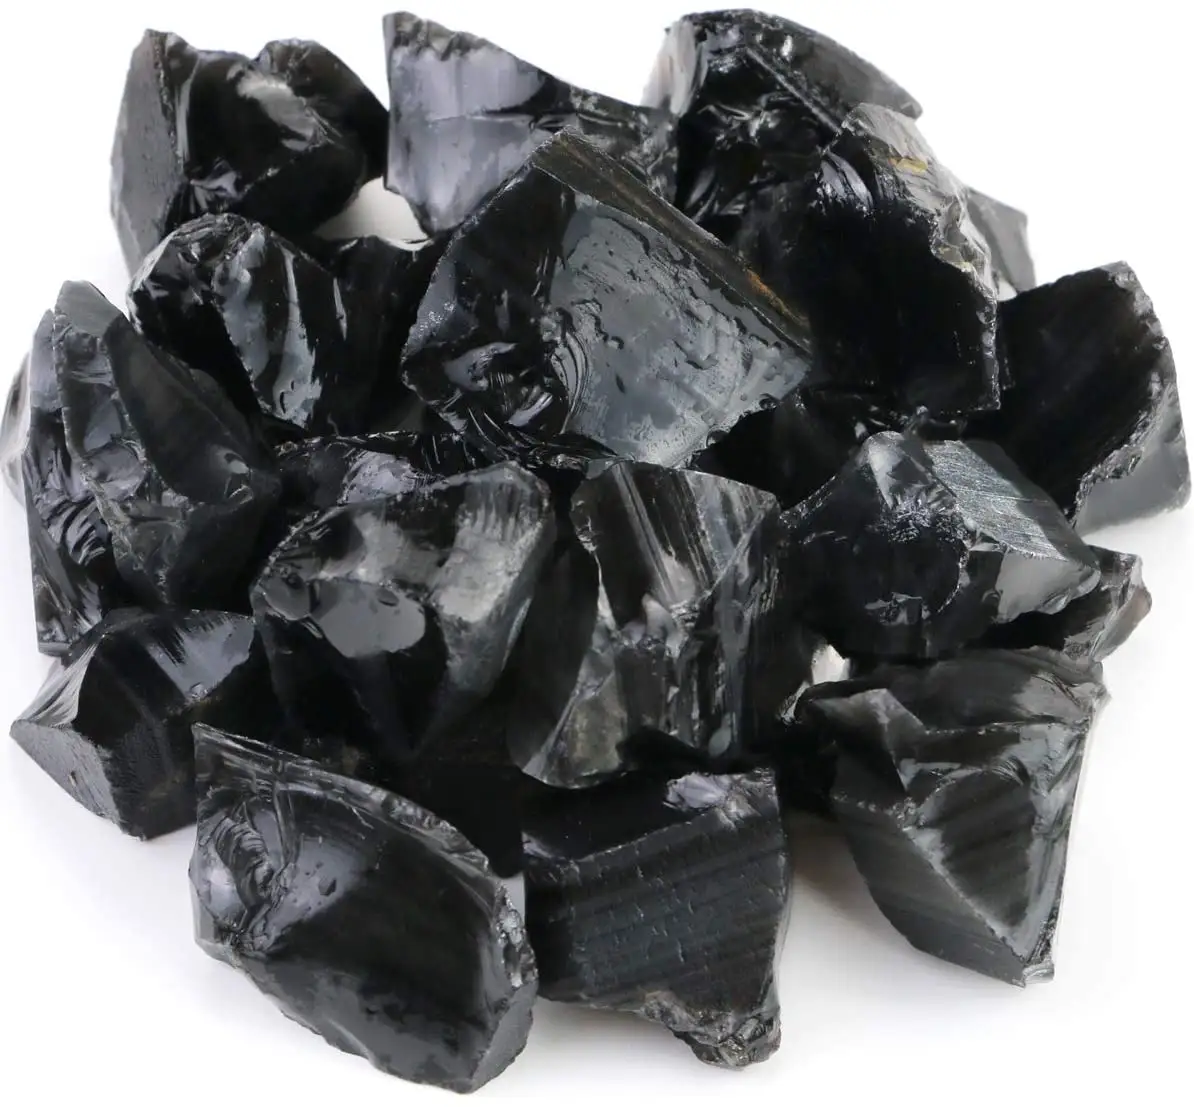 Rough Natural Black Obsidian Stones Raw Gemstone Crystal Rock for Tumbling,Cutting,Healing Reiki,Jewelry Making,Home Decoration